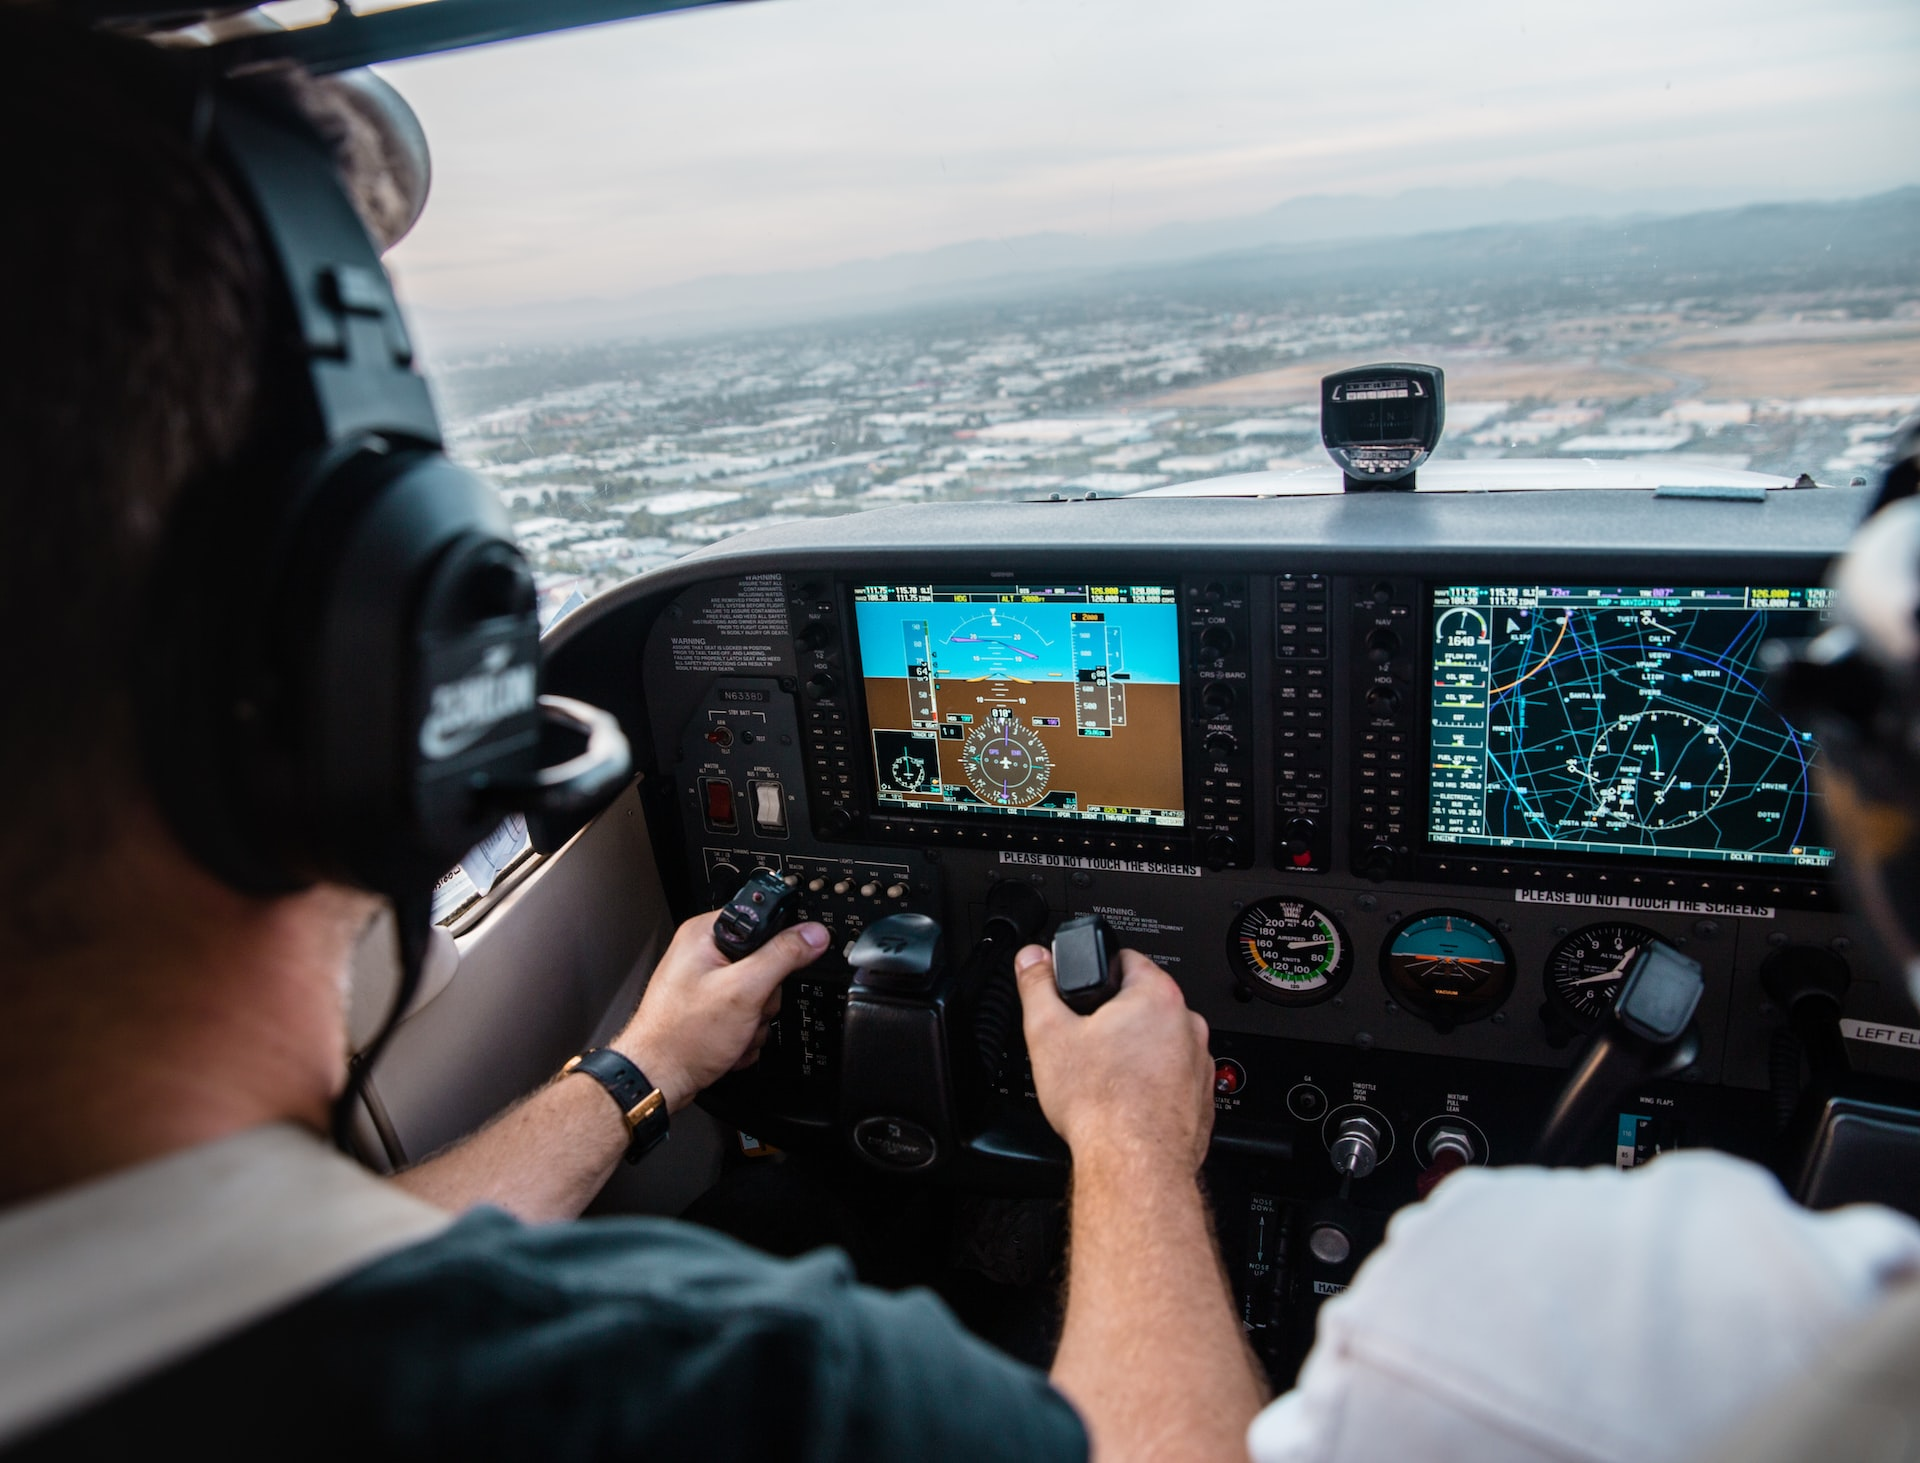 Two pilots in a cockpit navigating an aircraft and maintaining a green V speed.